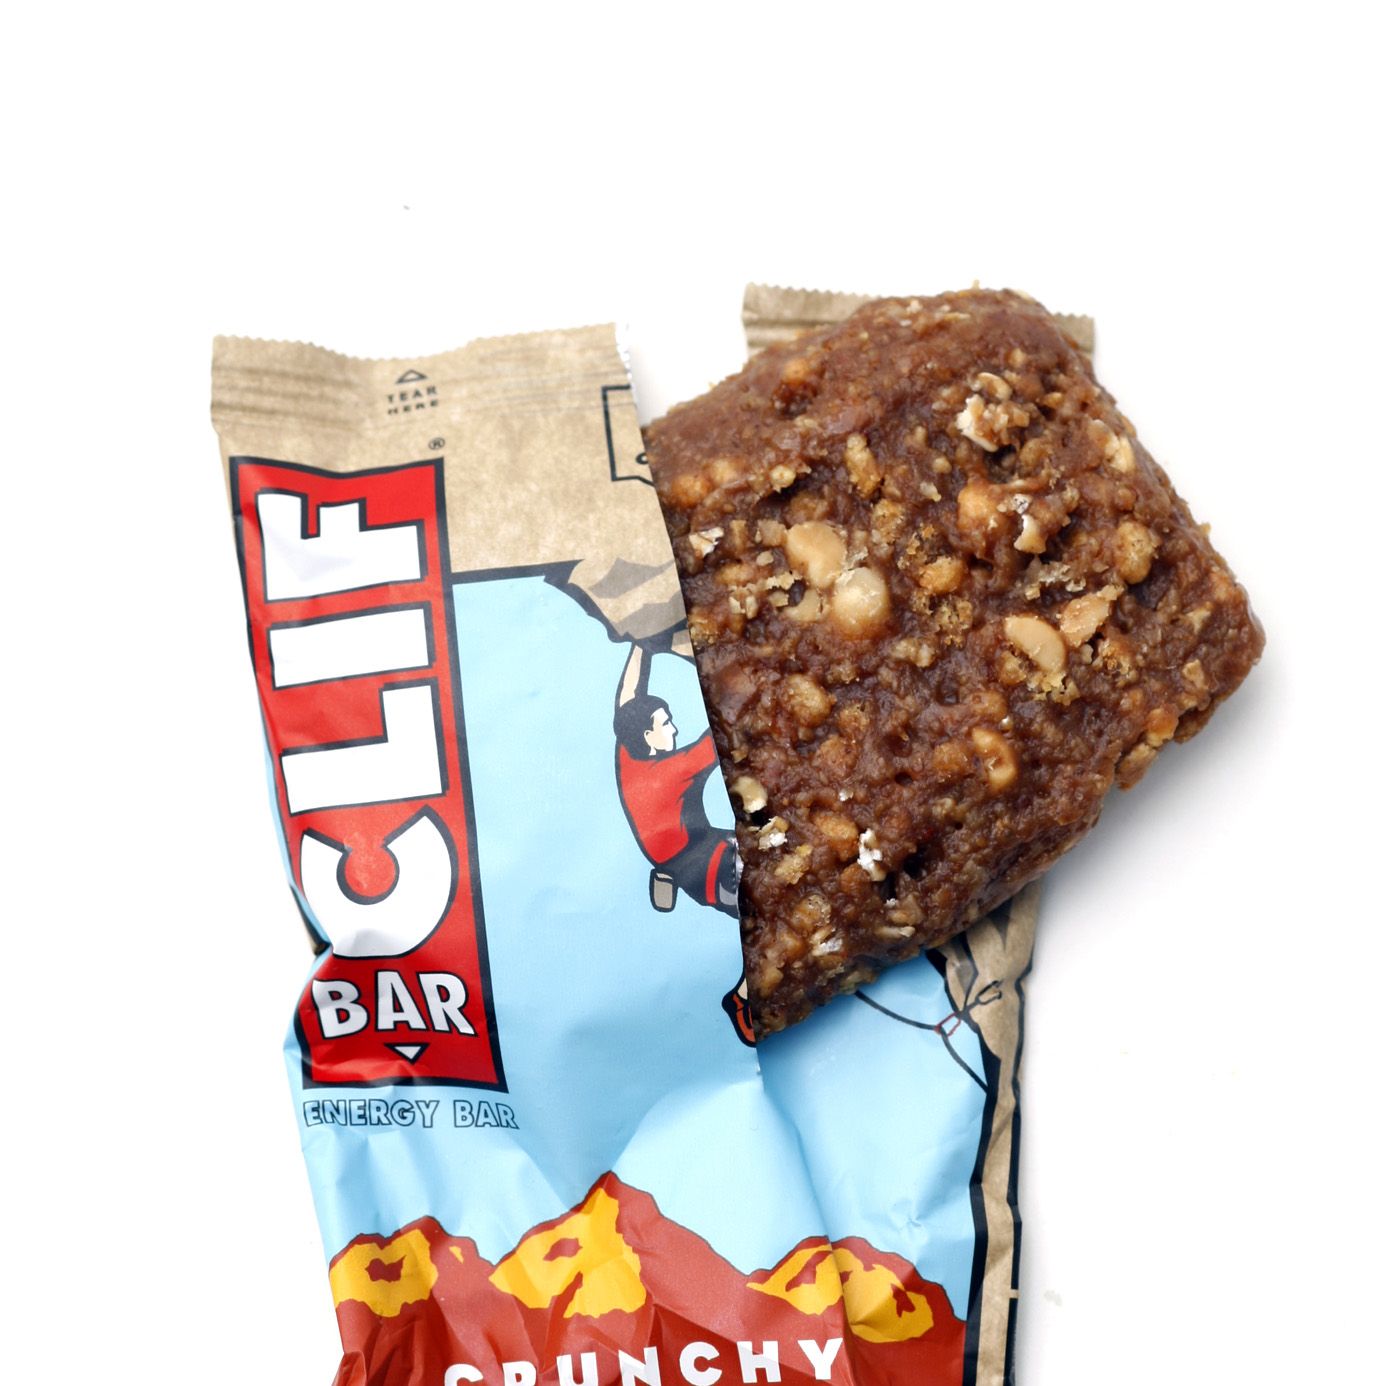 Crunchy peanut butter "Clif bar" photographed in the studio of the Los Angeles Times on September 1